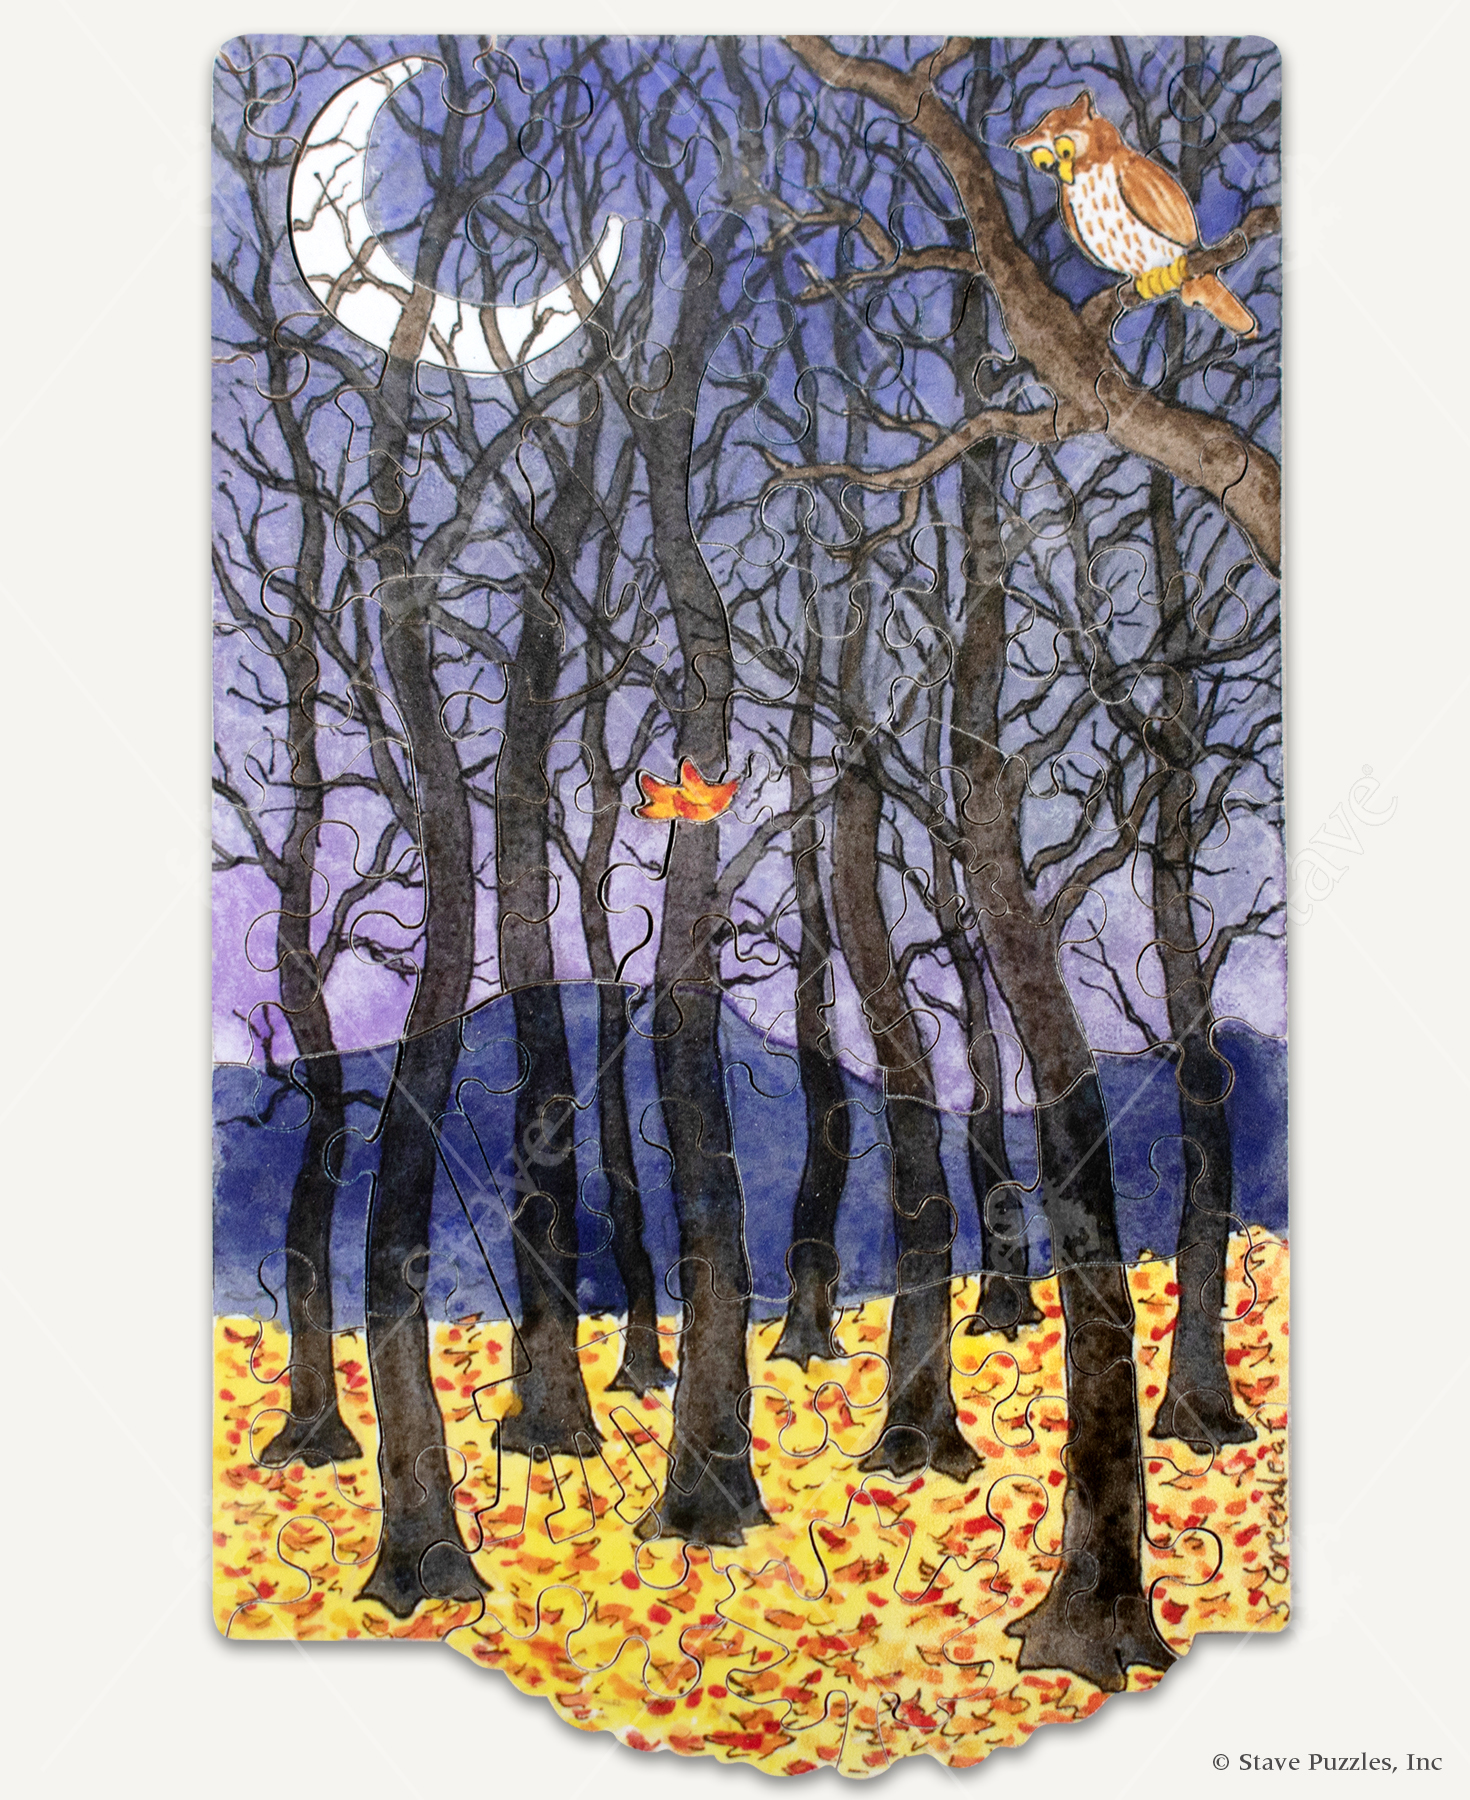 I Beleaf In You wooden jigsaw puzzle exhibits the last leaf on a tree is falling off on an autumn night, witnessed by an owl sitting on a branch.